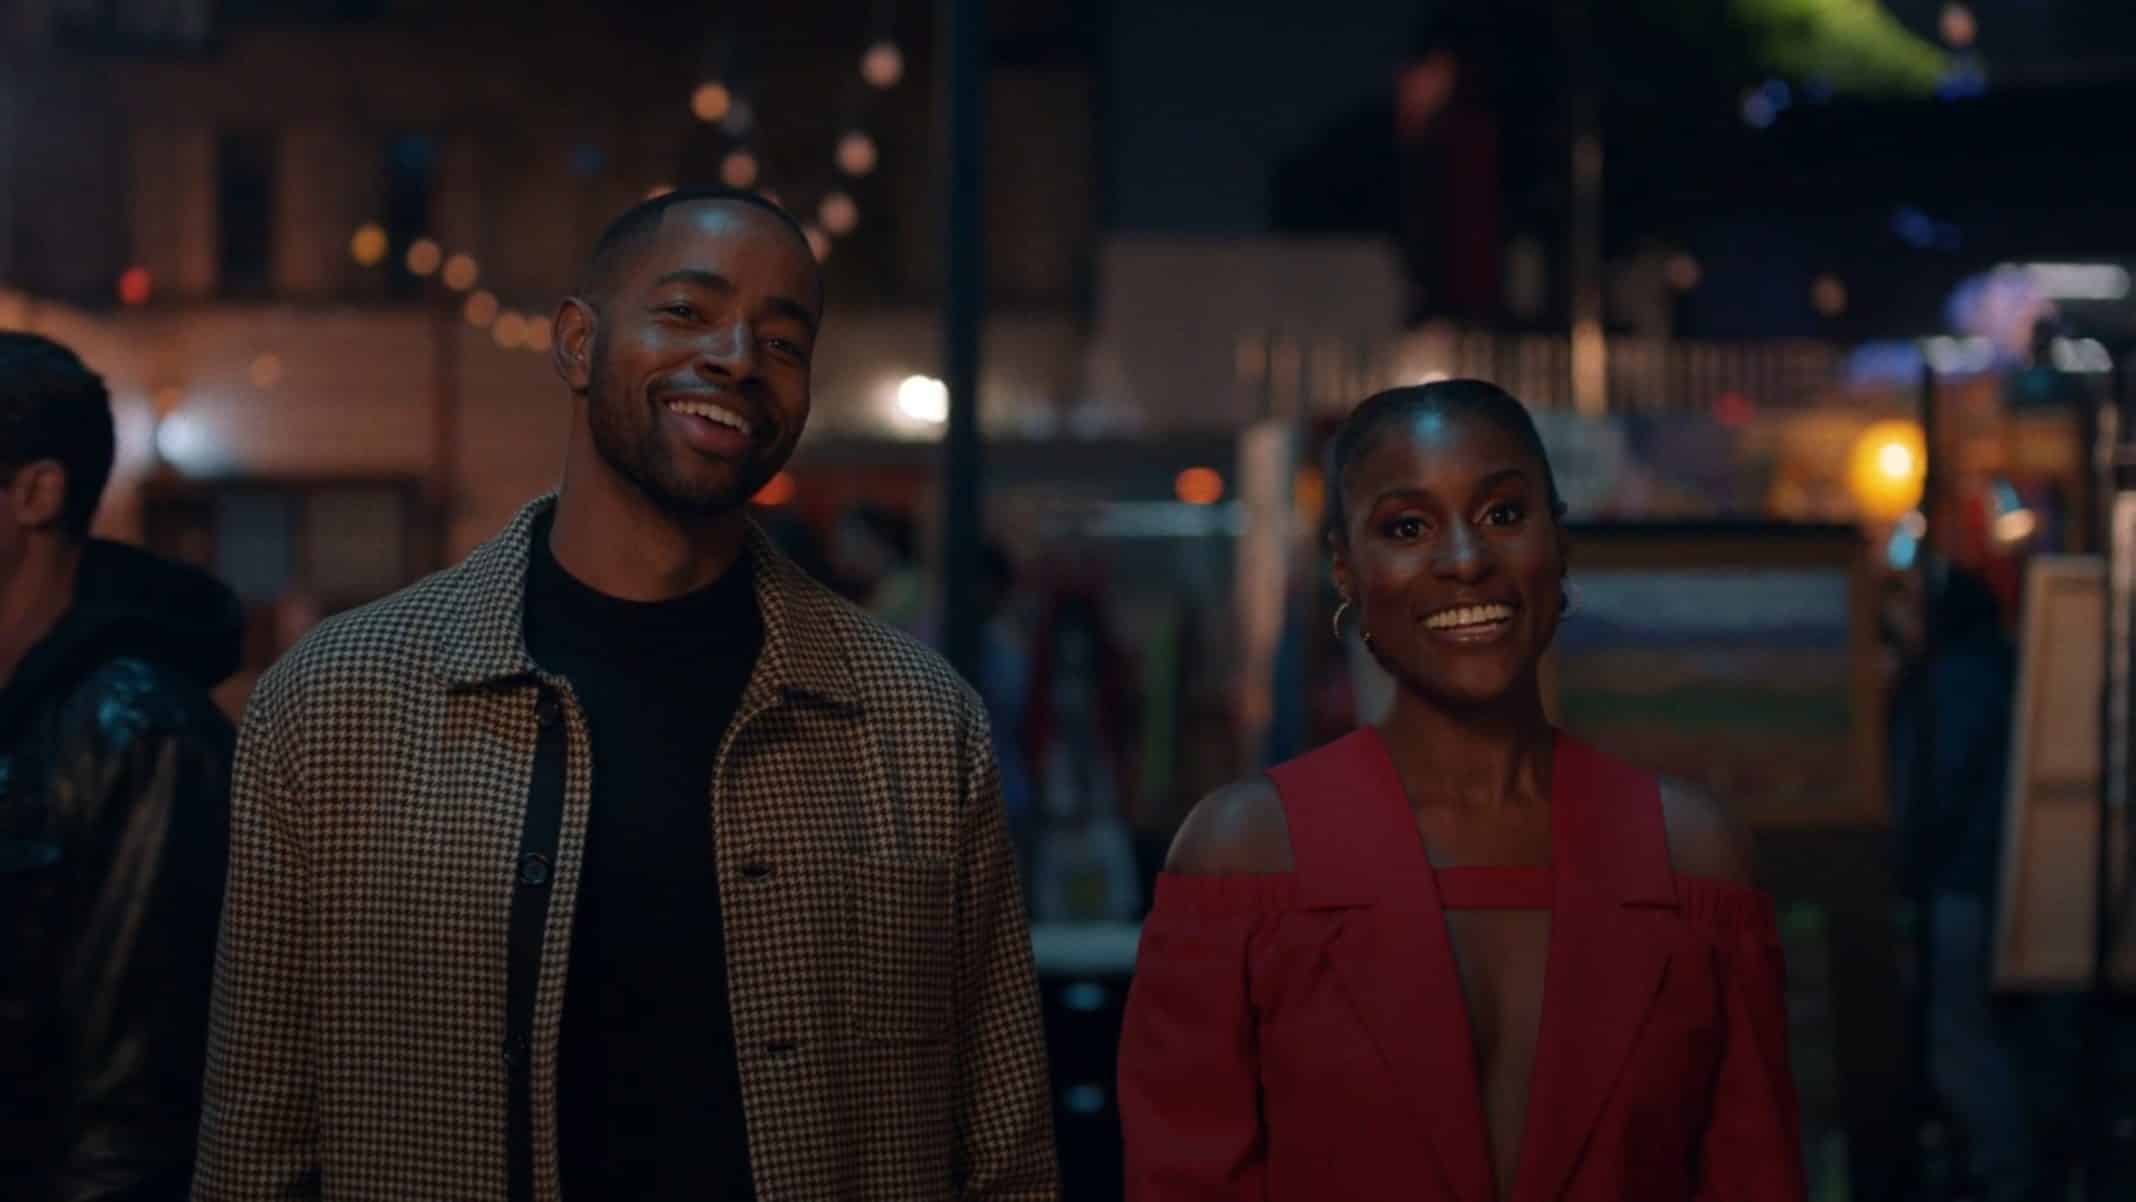 Insecure: Season 4 Episode 8 “Lowkey Happy” – Recap/ Review with Spoilers